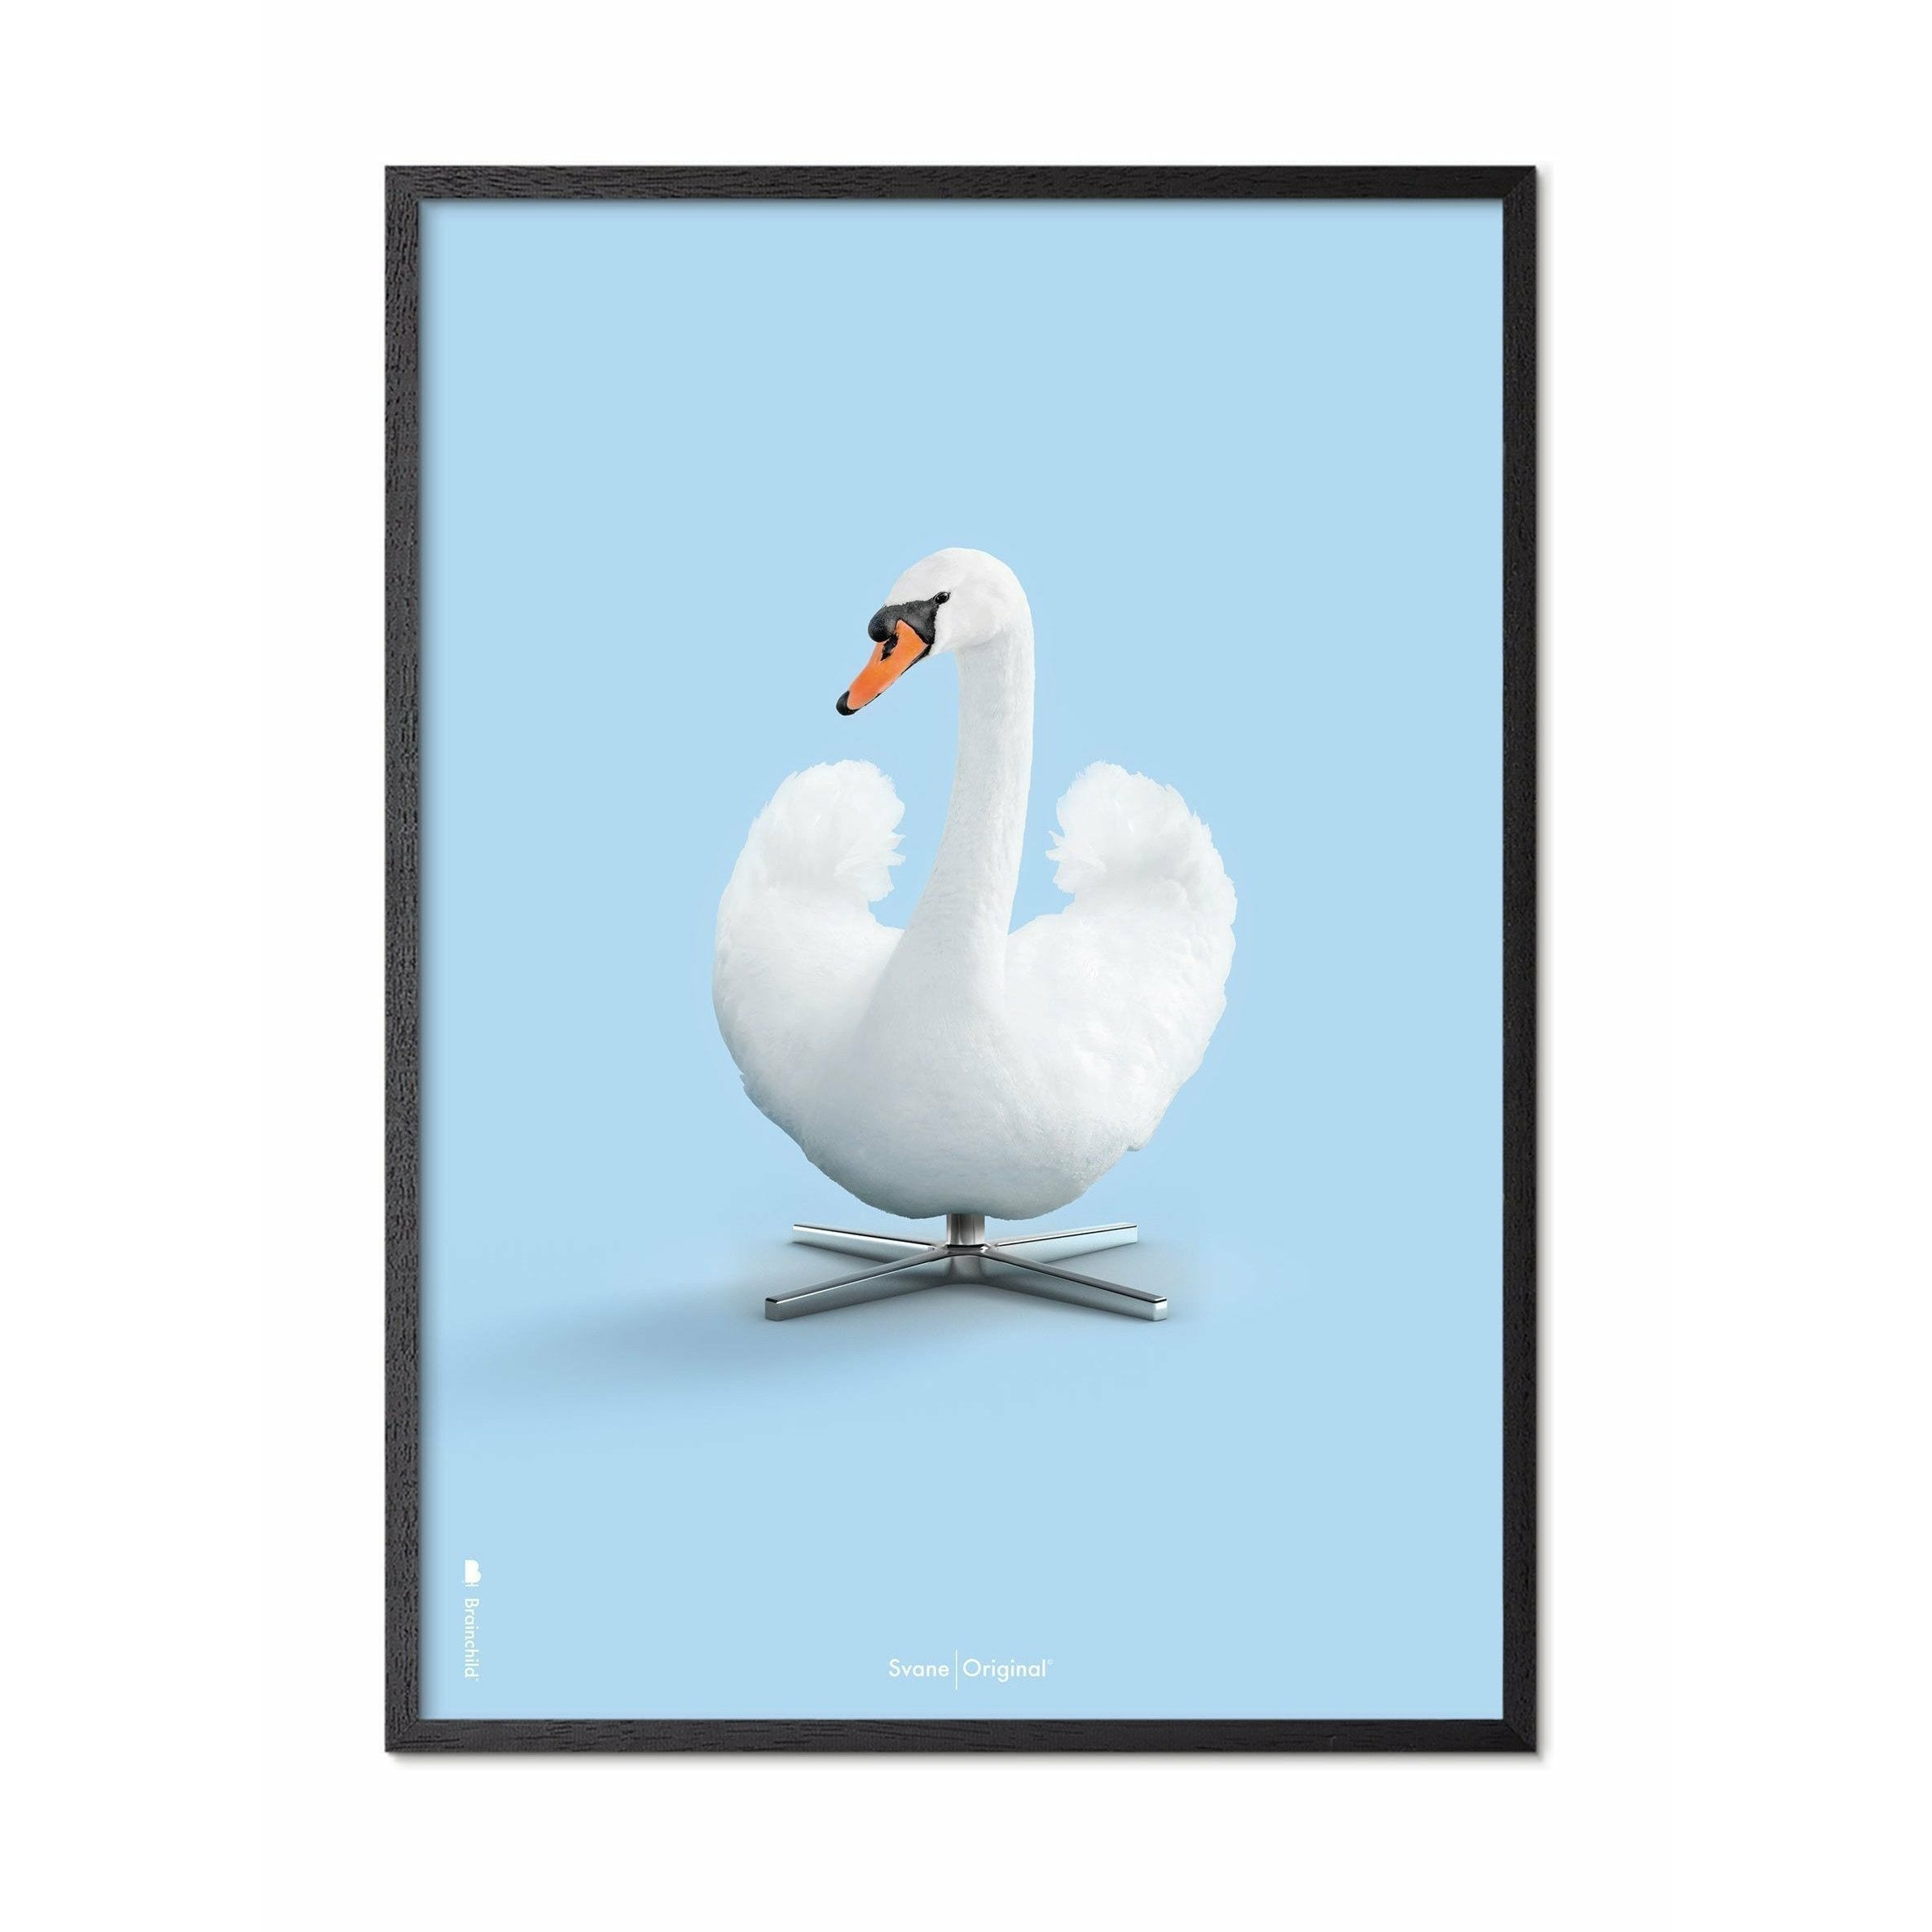 Brainchild Swan Classic Poster, Frame In Black Lacquered Wood A5, Light Blue Background